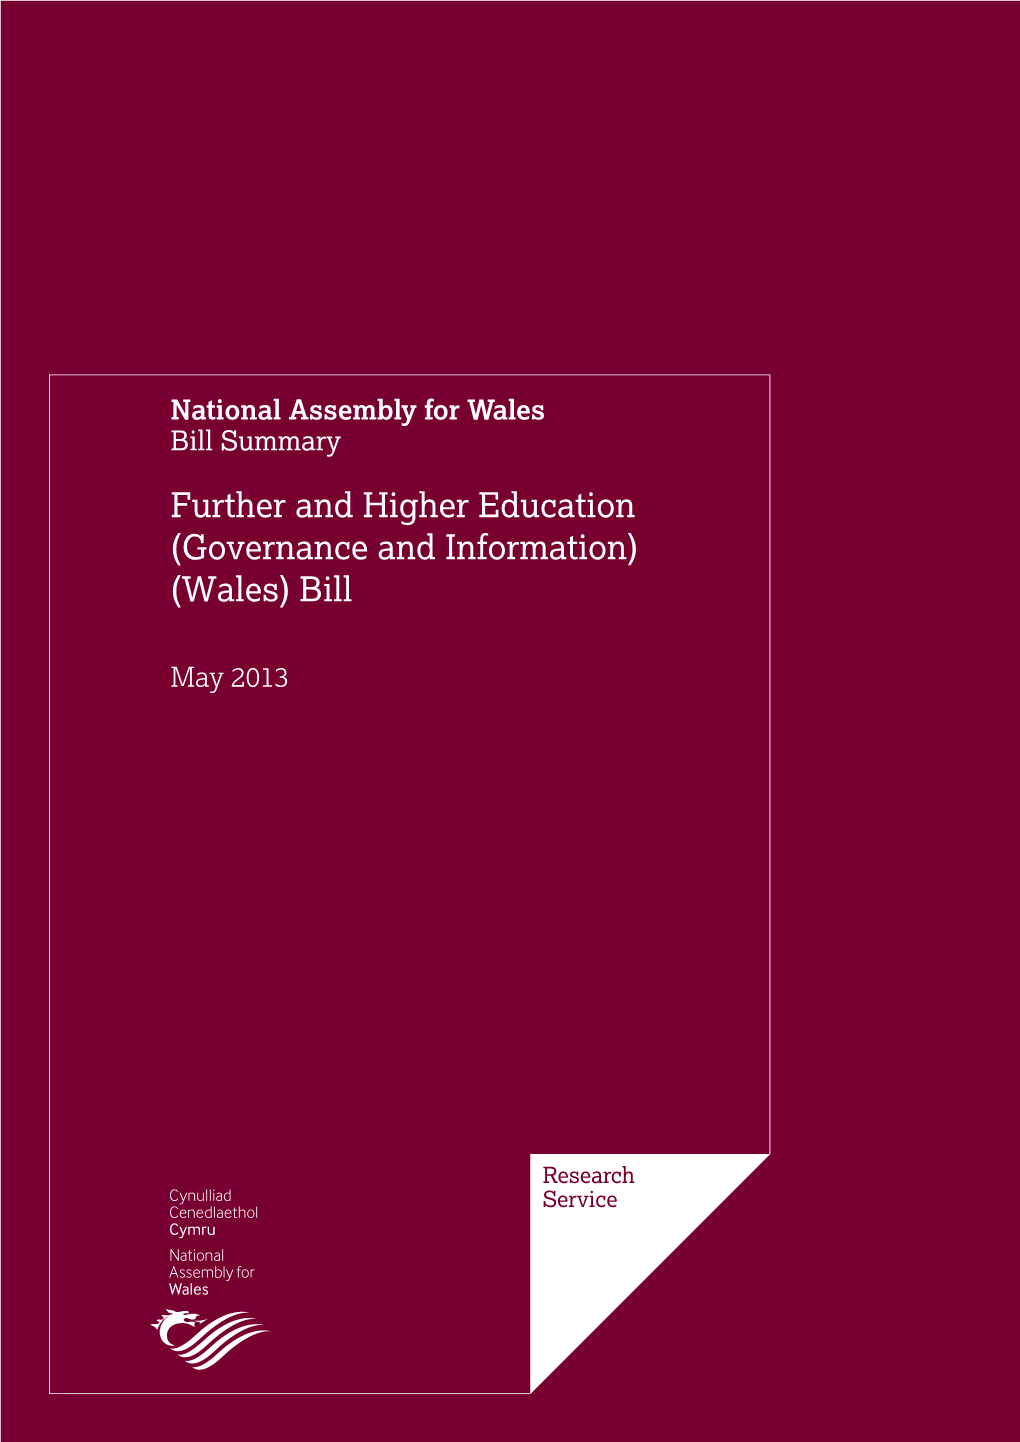 Further and Higher Education (Governance and Information) (Wales) Bill